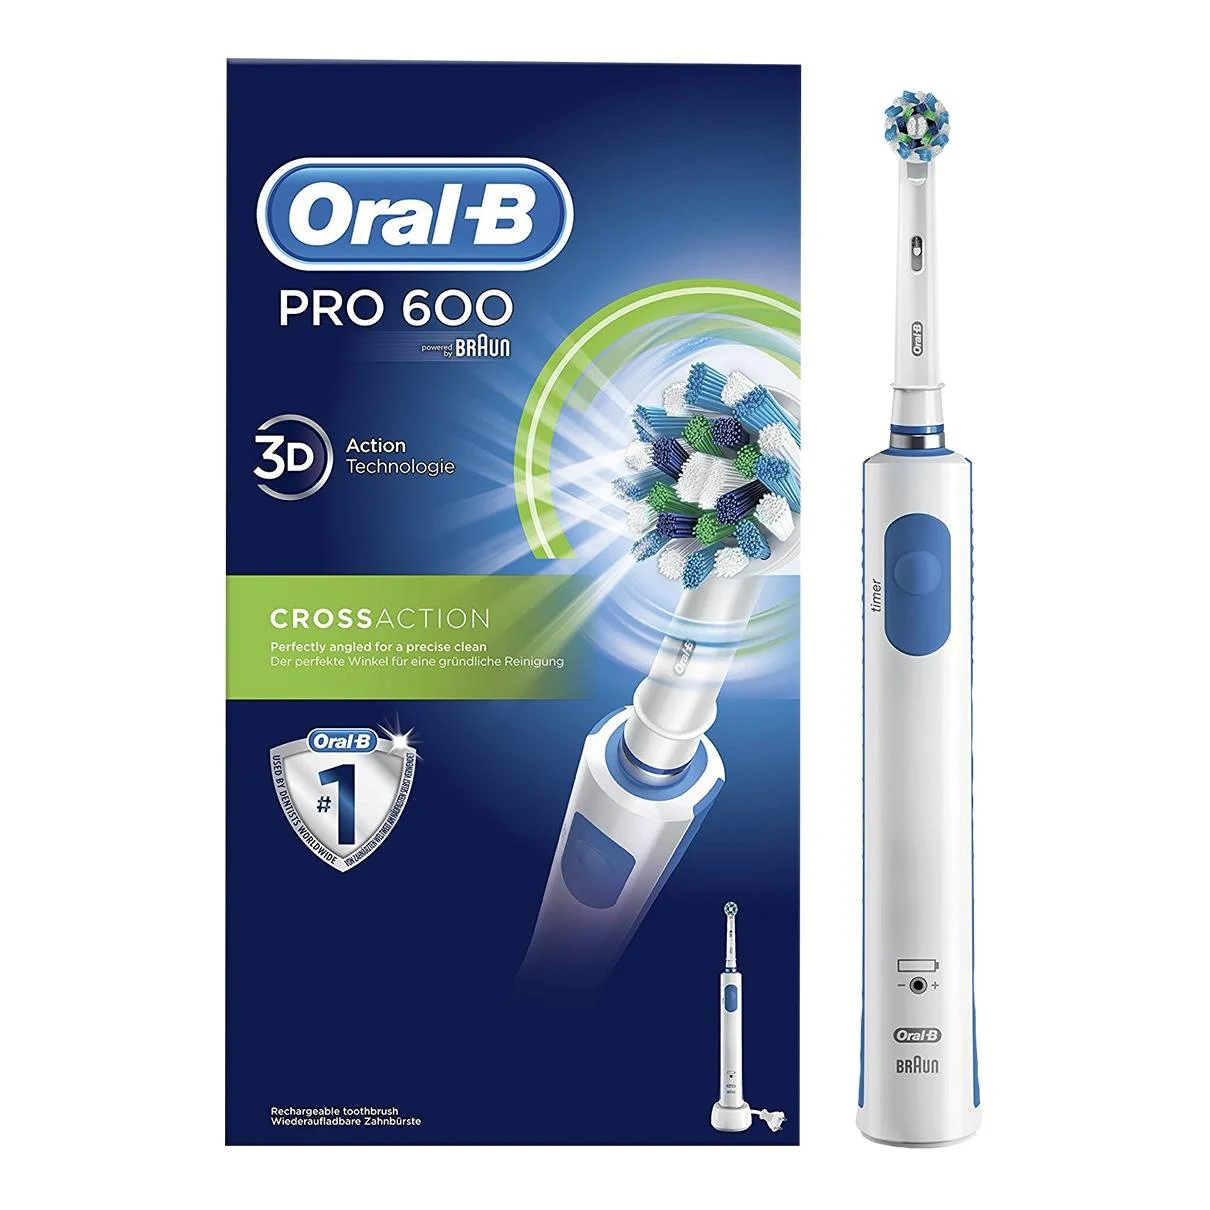 Oral-B Pro 600 Electric Rechargeable Toothbrush 